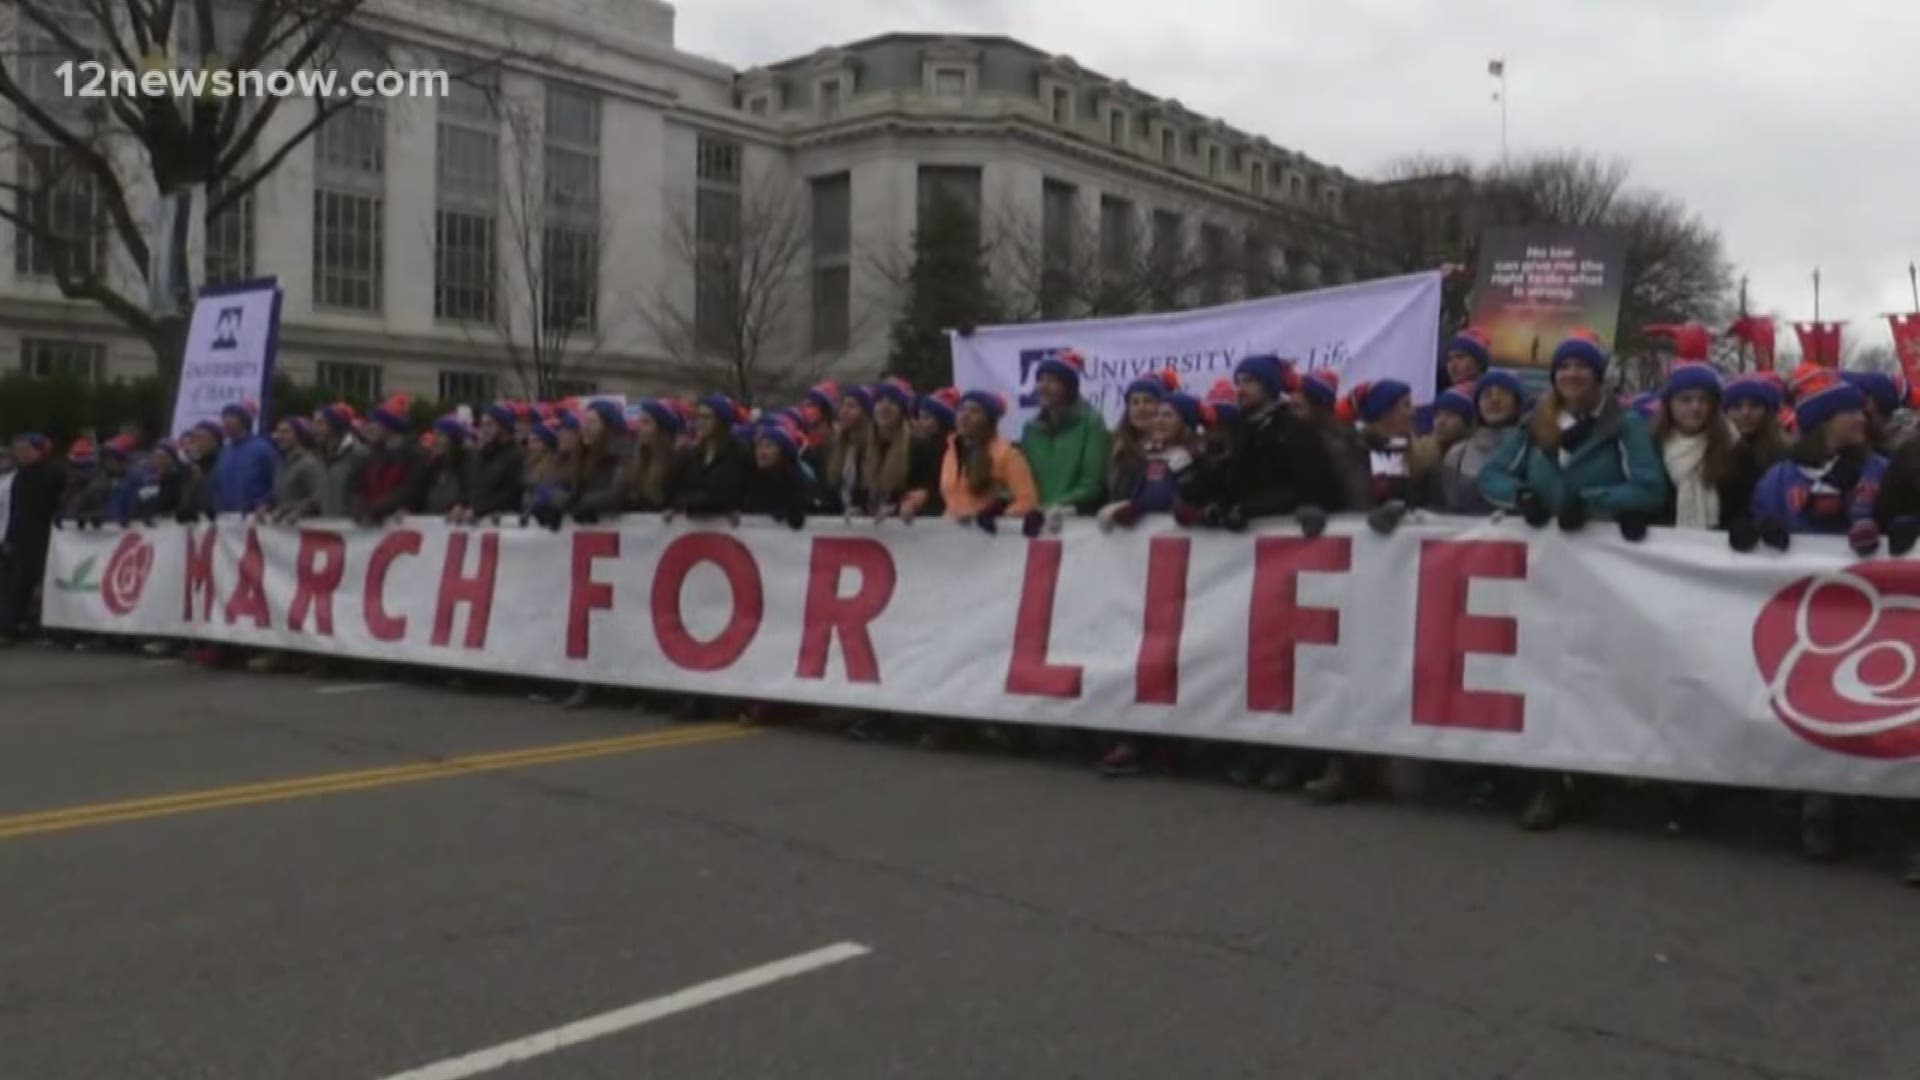 Thousands march to supreme court building in efforts to end abortion.